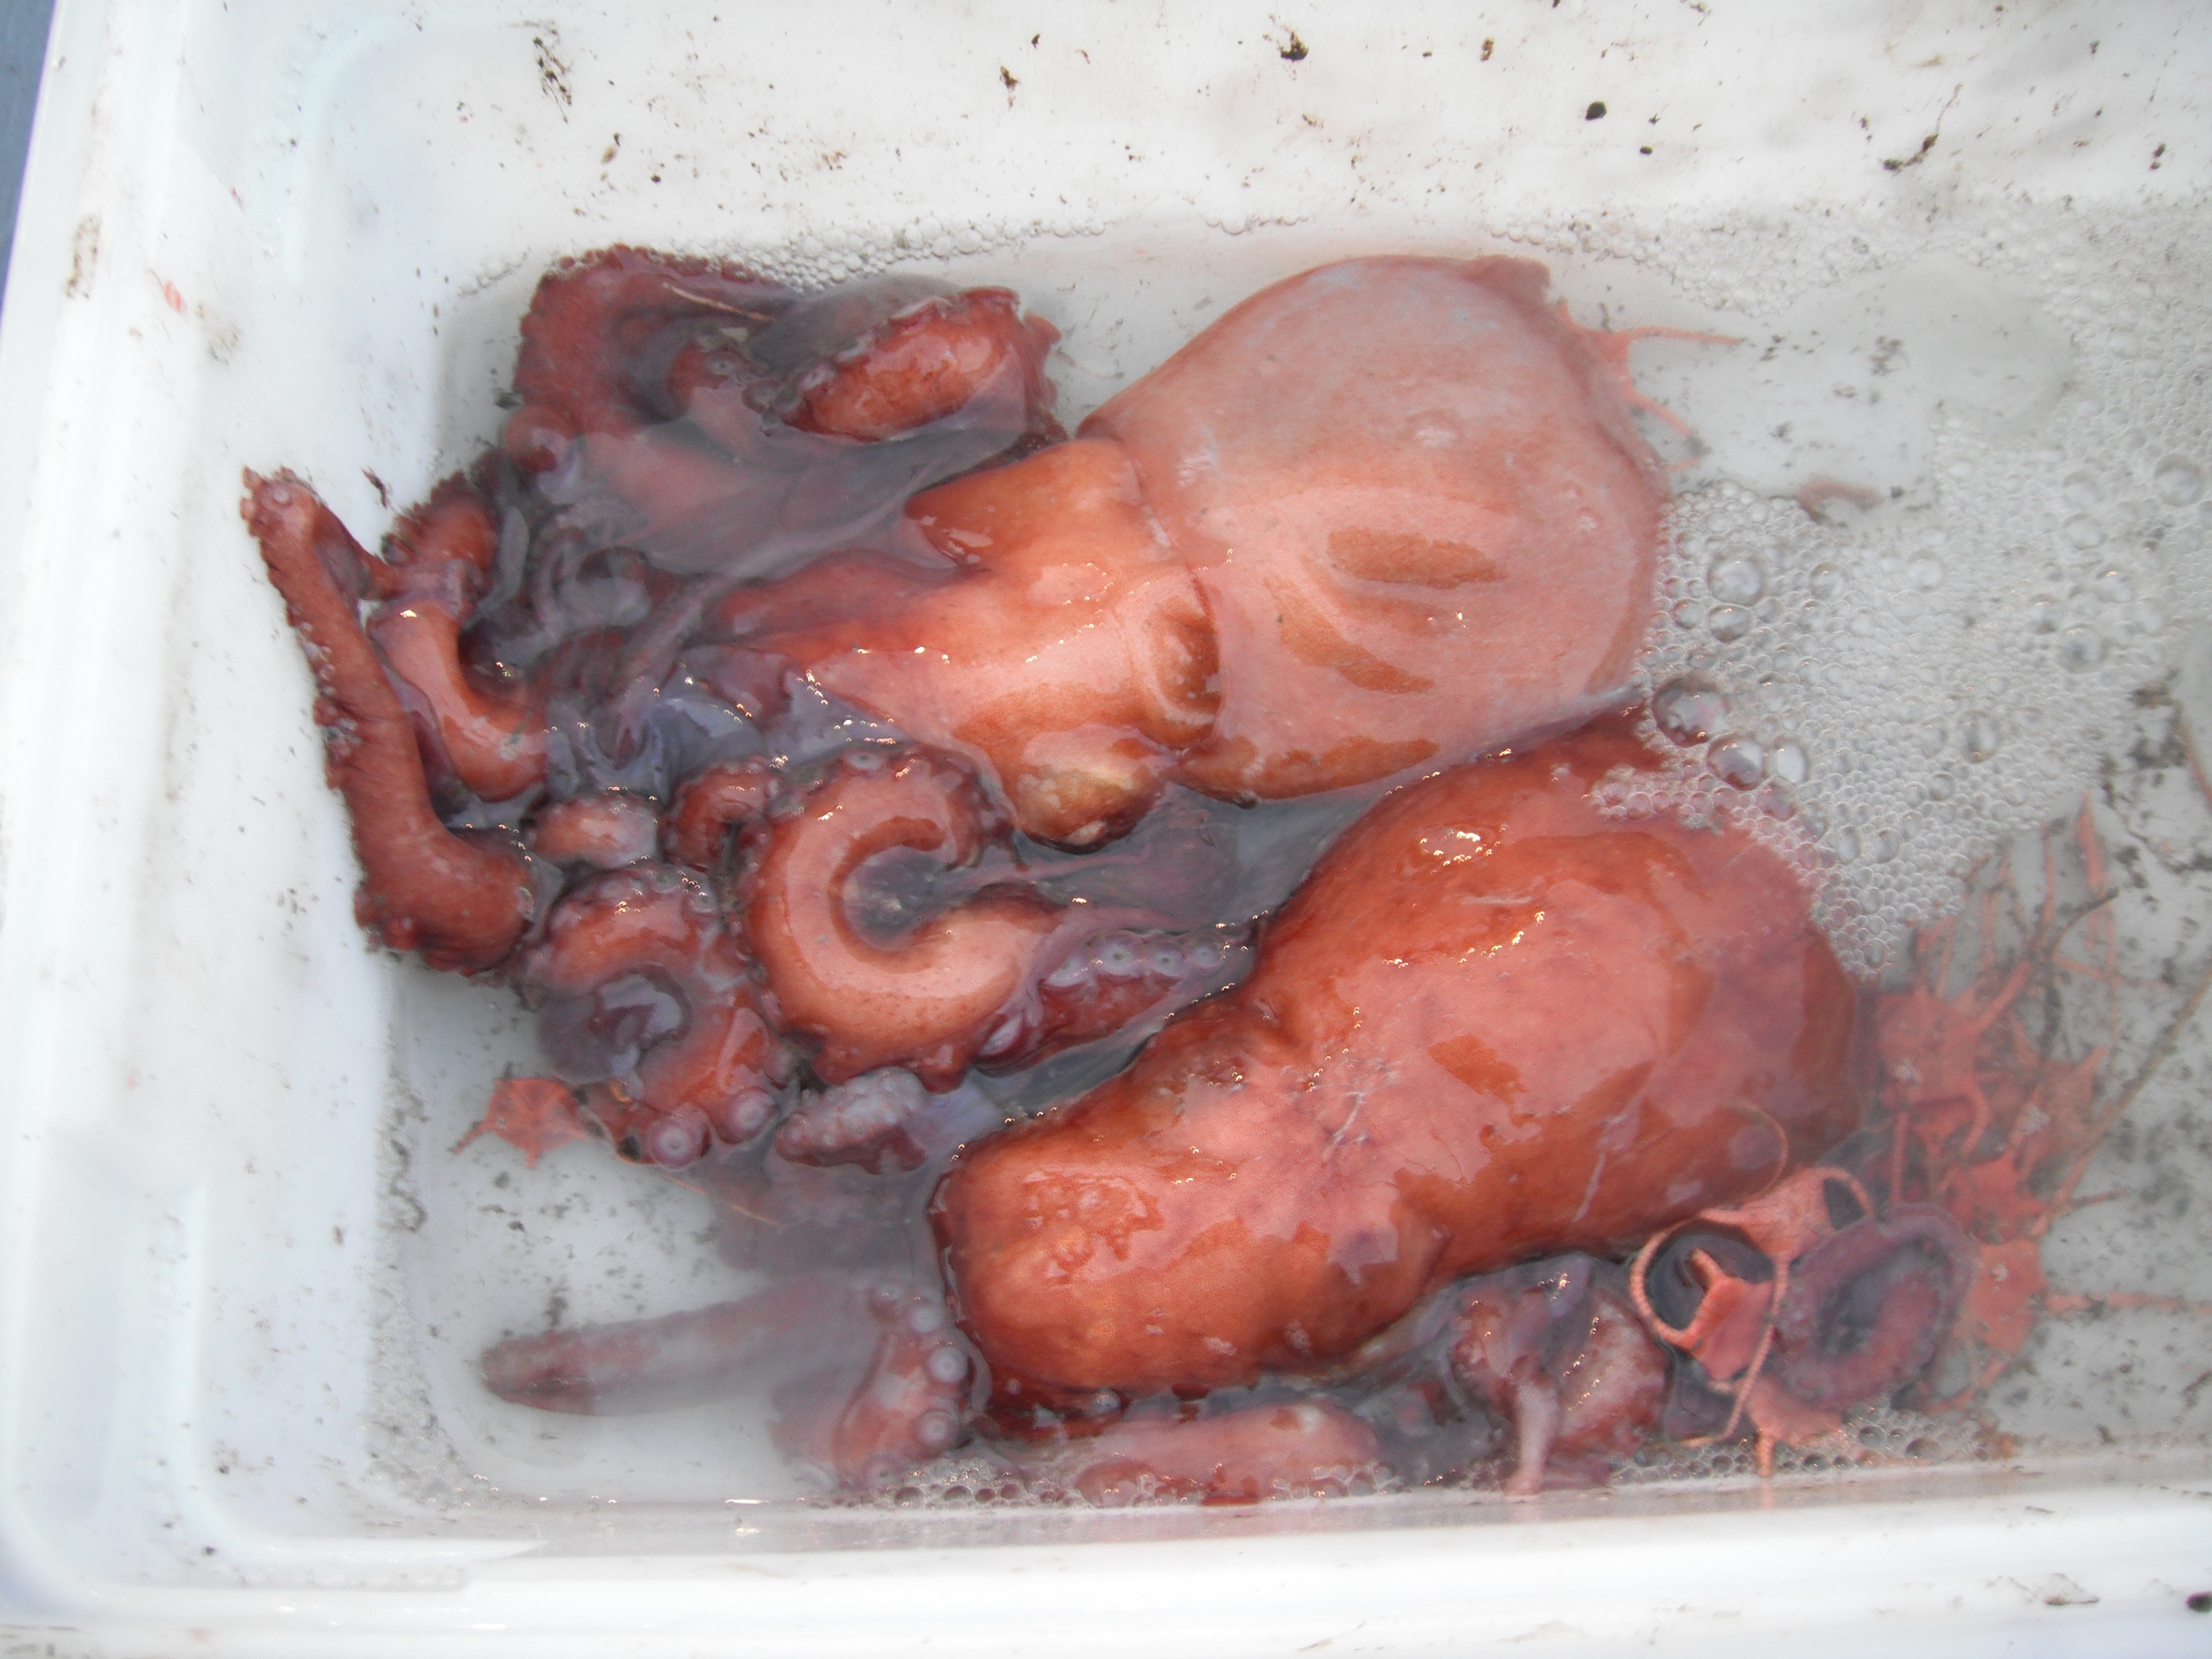 We managed to keep these deep sea octopuses alive! 